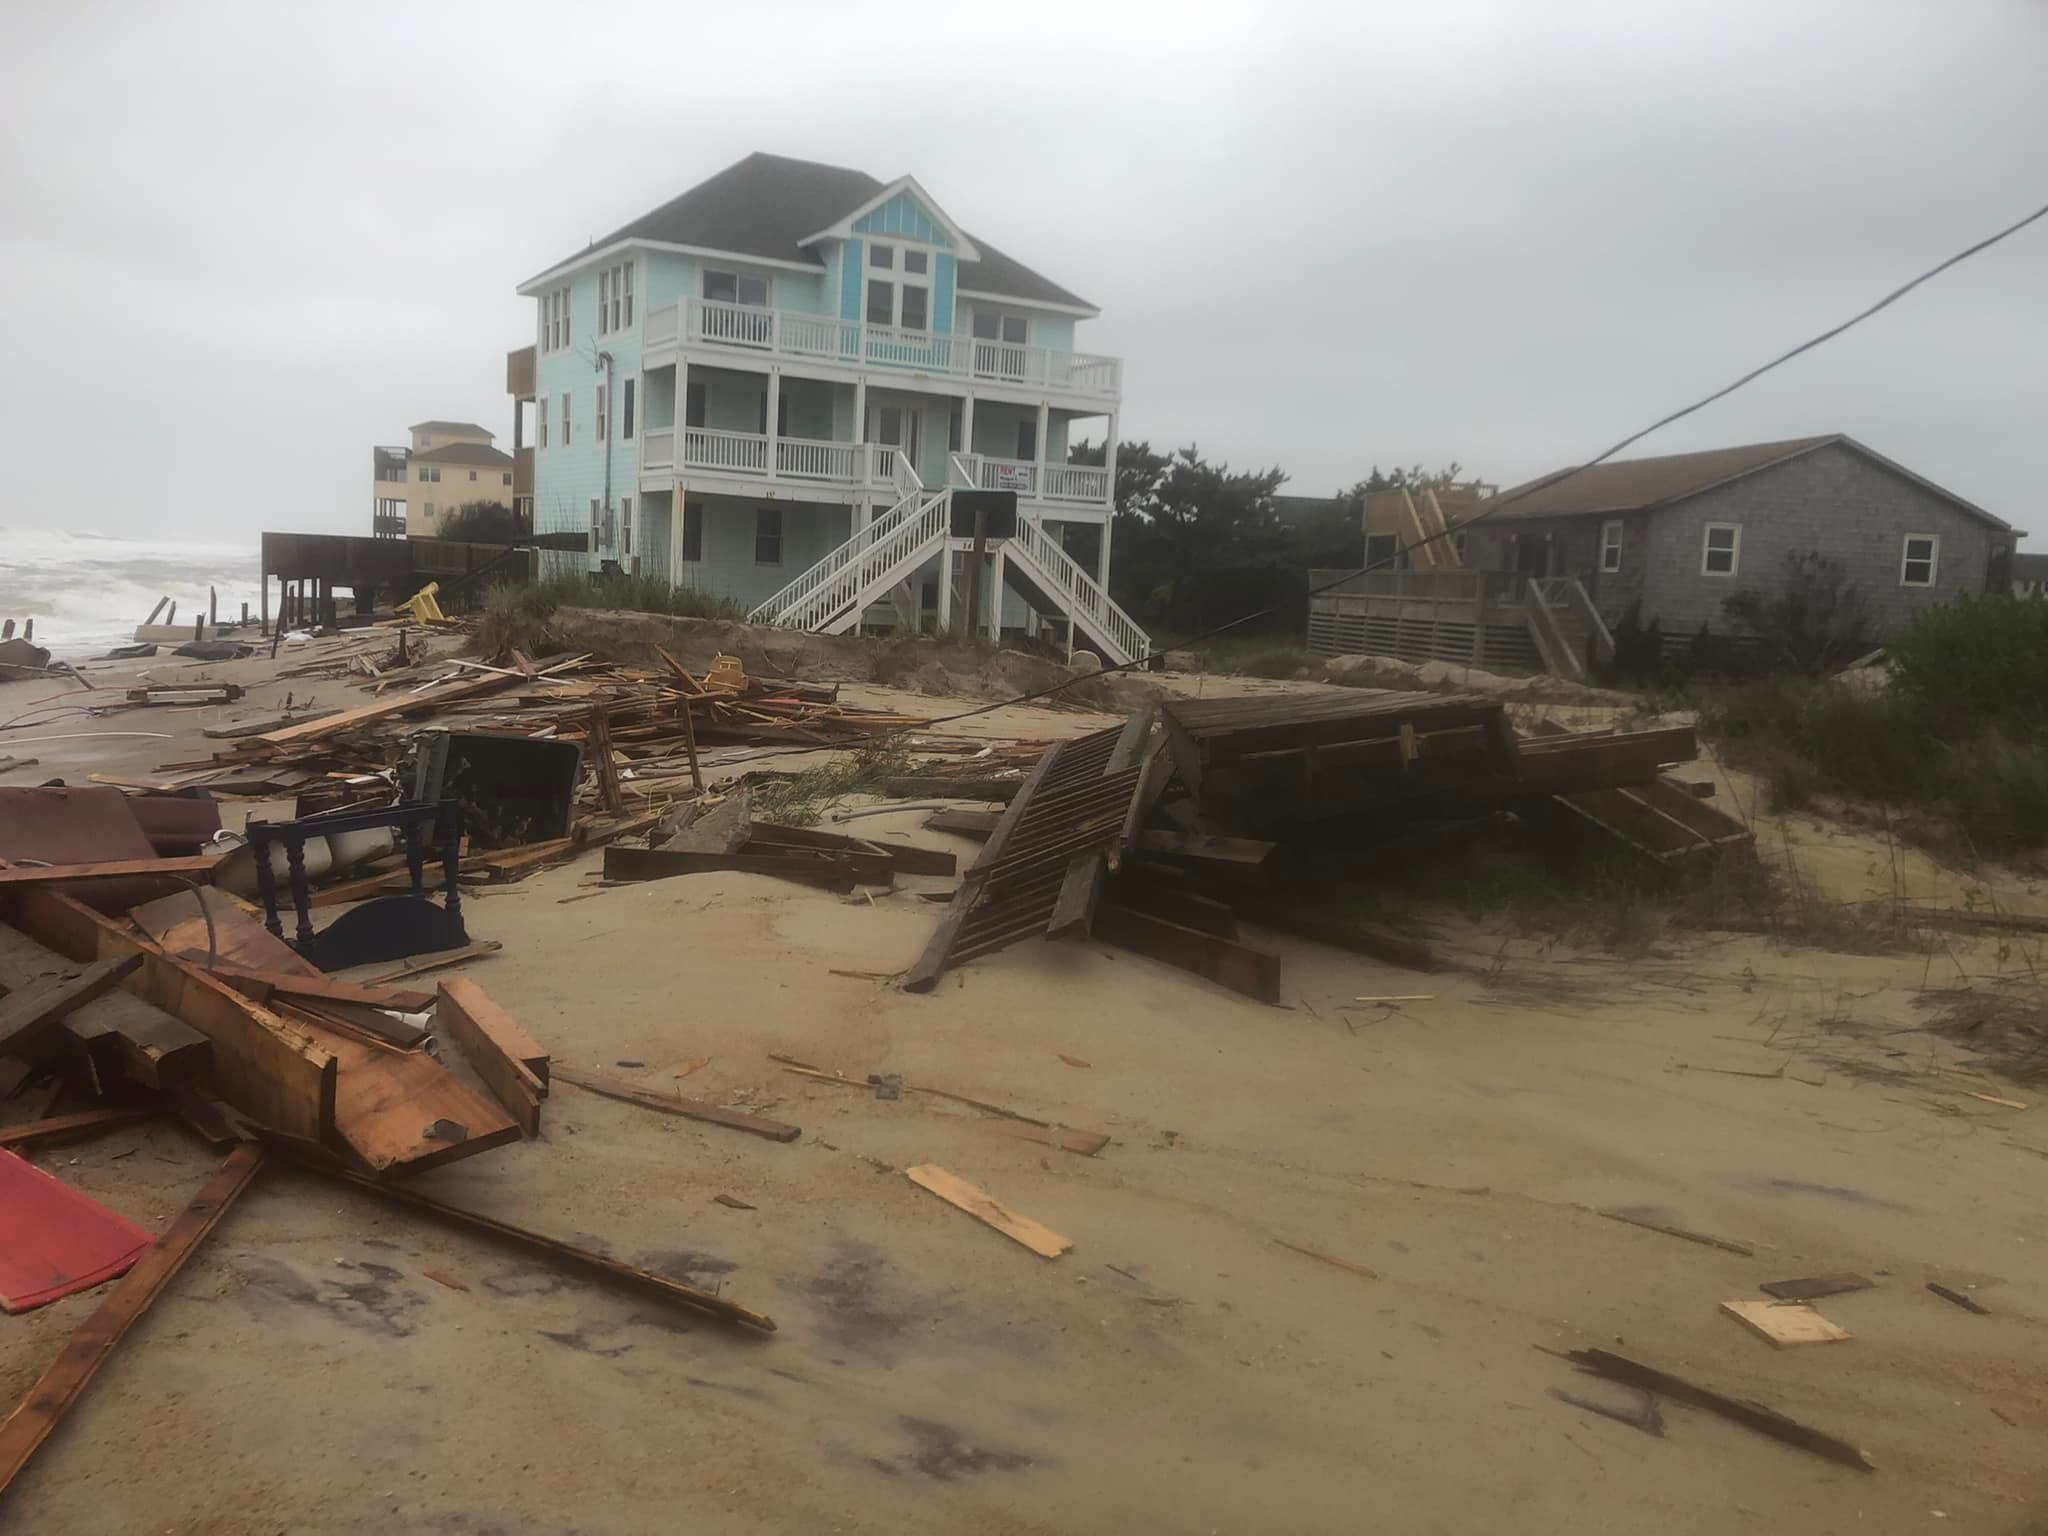 Coastal Resources Commission expected to discuss new rules in response to threatened beach houses